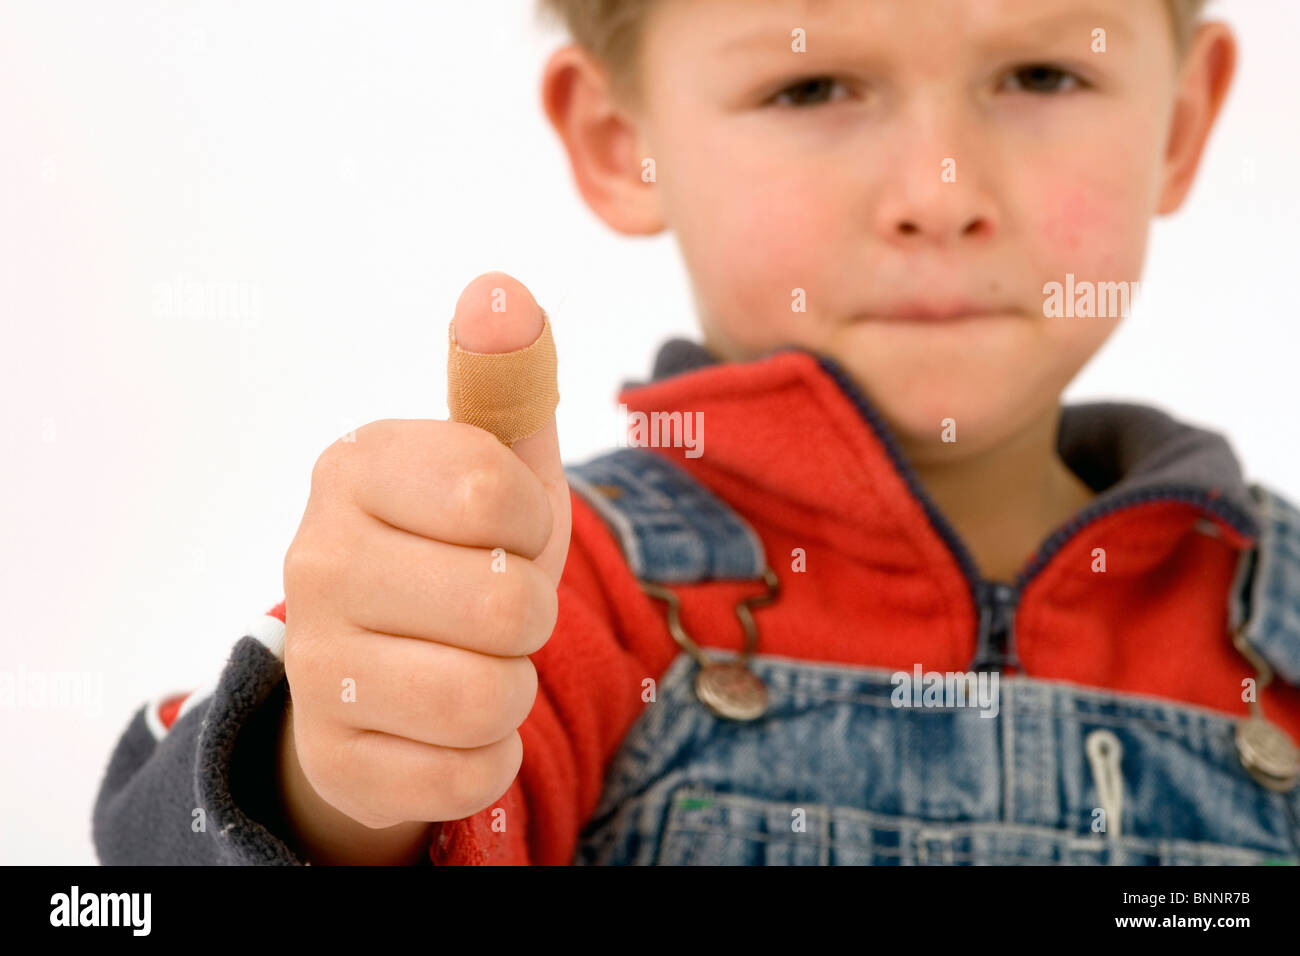 Junge Junge Five-Year-Old Five-Year-Old Verletzung Verletzung Gips leider Schmerzen Schmerzen Stockfoto